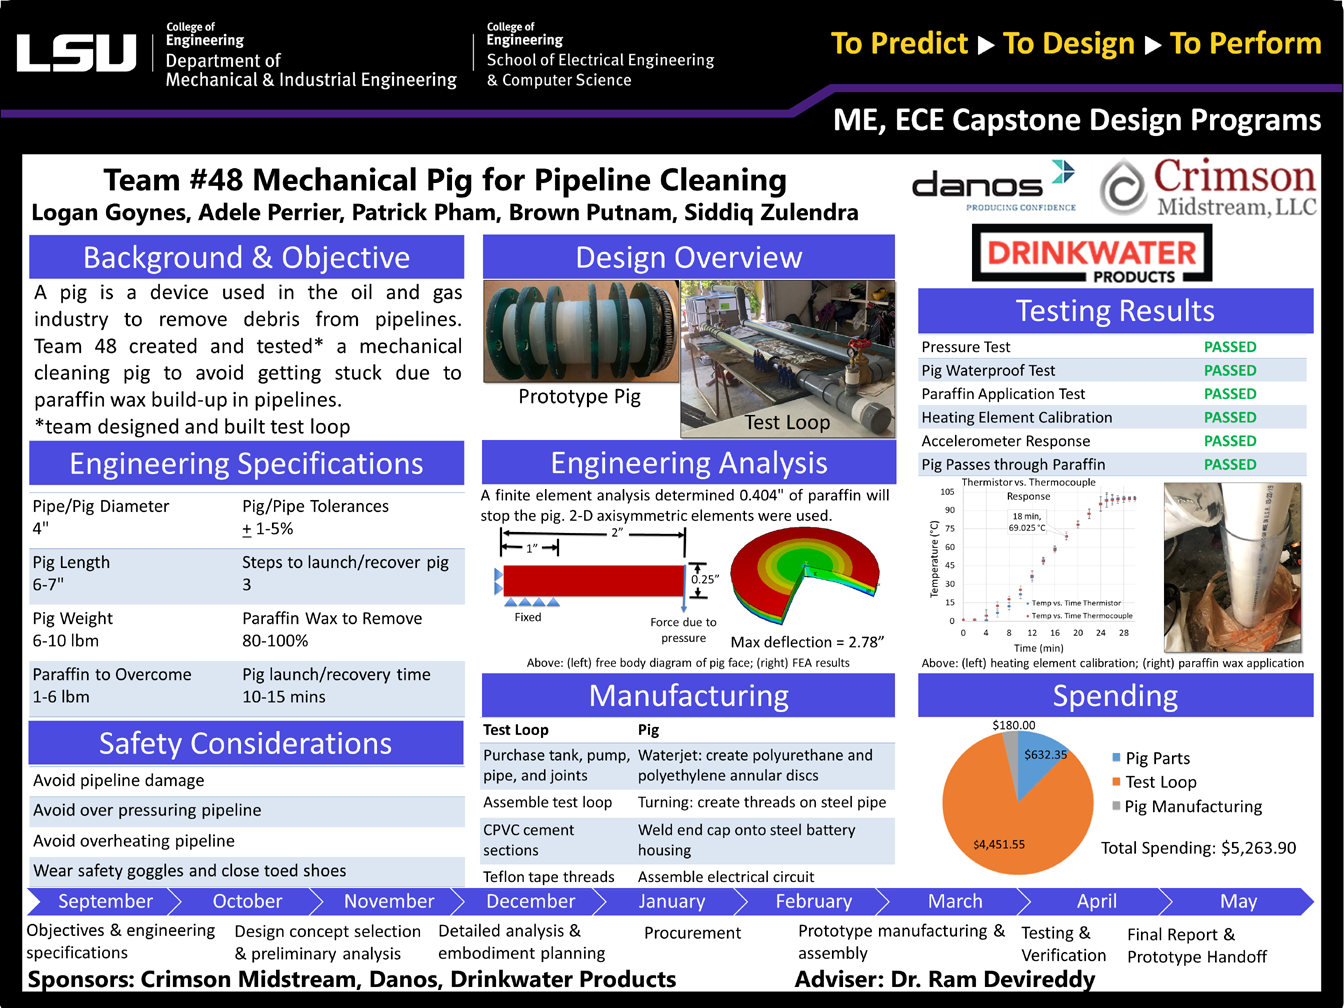 Project 48: Mechanical Cleaning Pig that Avoids Pipeline Plugging (2019)